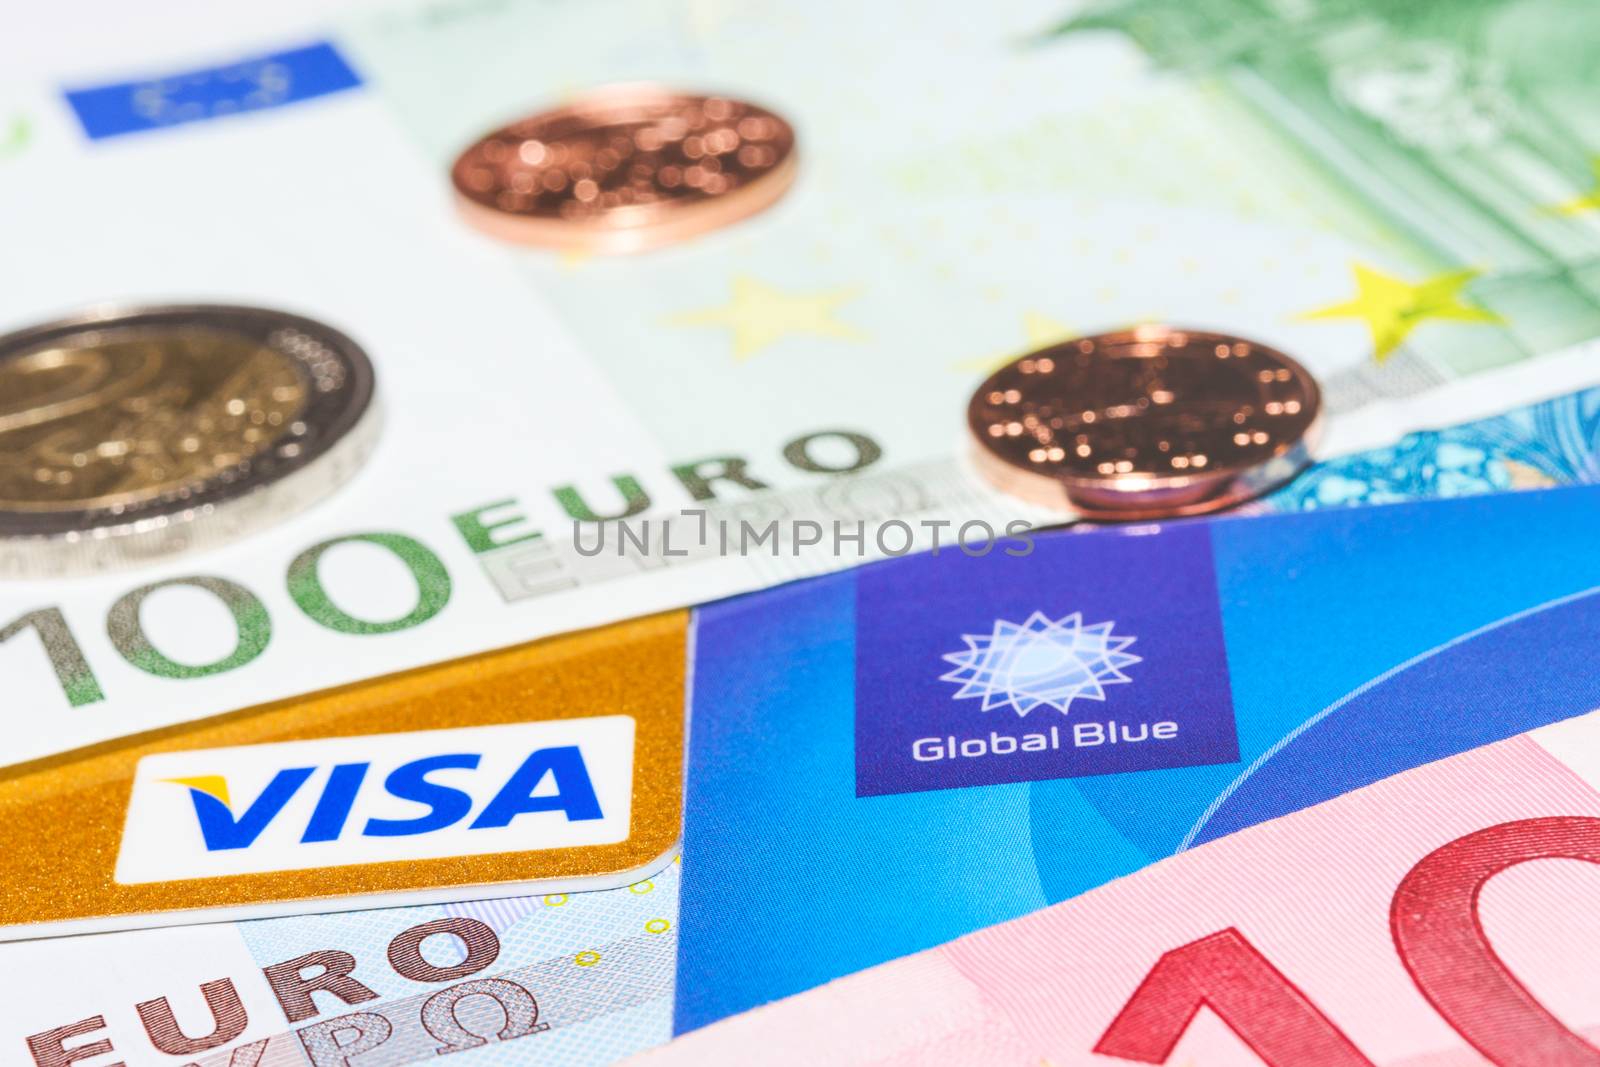 MUNICH, GERMANY - FEBRUARY 23, 2014: Visa credit card and Global Blue tax free against cash money